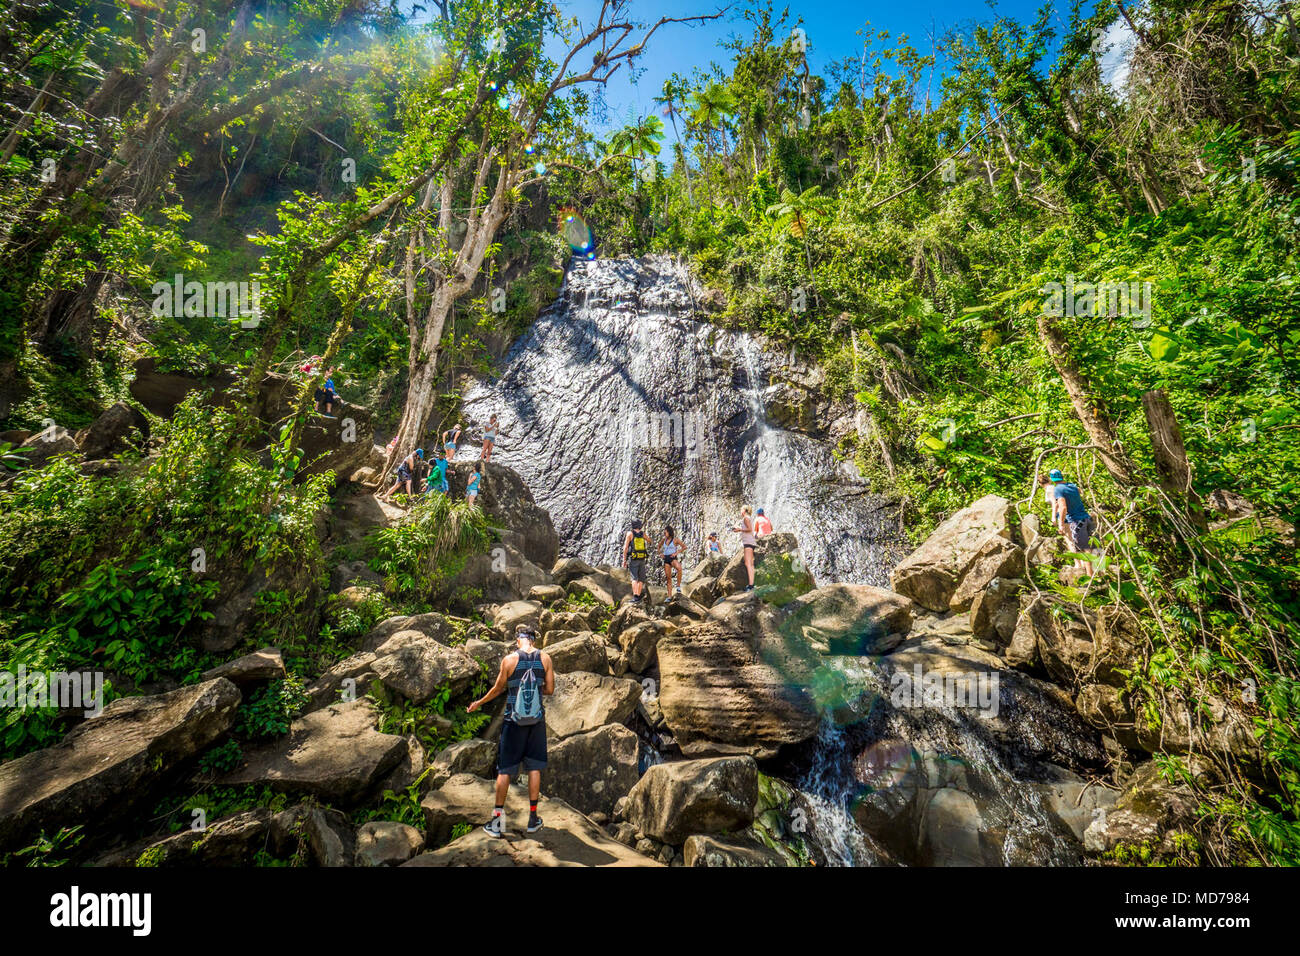 Six months after Hurricane Maria, only a small portion of El Yunque National Forest, Puerto Rico, is available for enjoyment. Here, tourists enjoy climbing La Coca Waterfall. Stock Photo